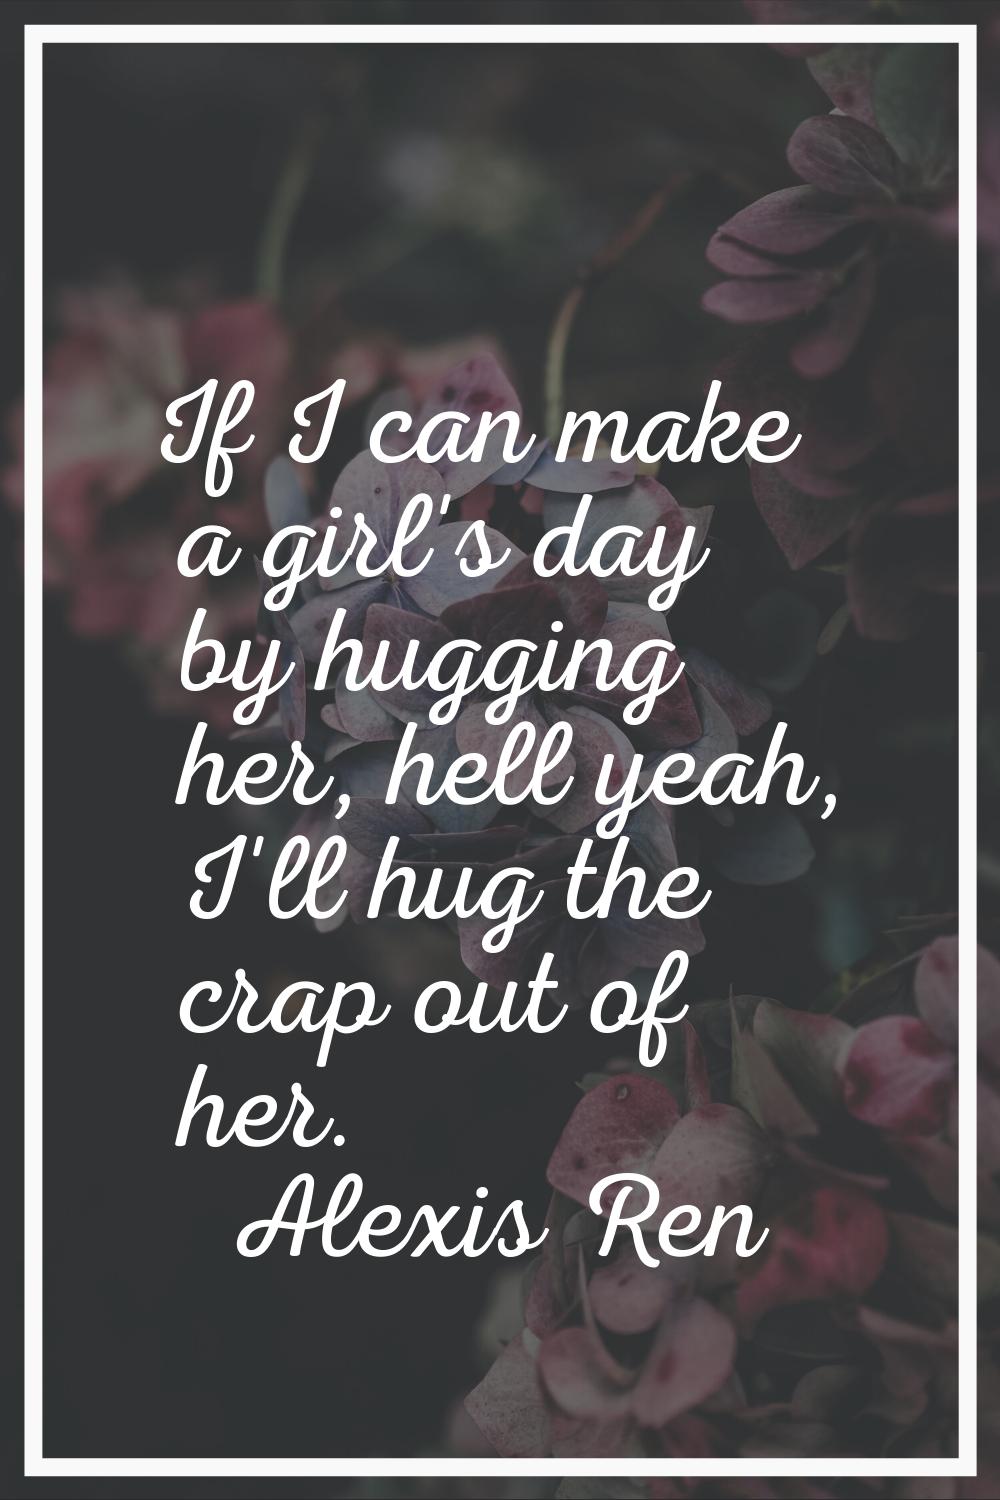 If I can make a girl's day by hugging her, hell yeah, I'll hug the crap out of her.